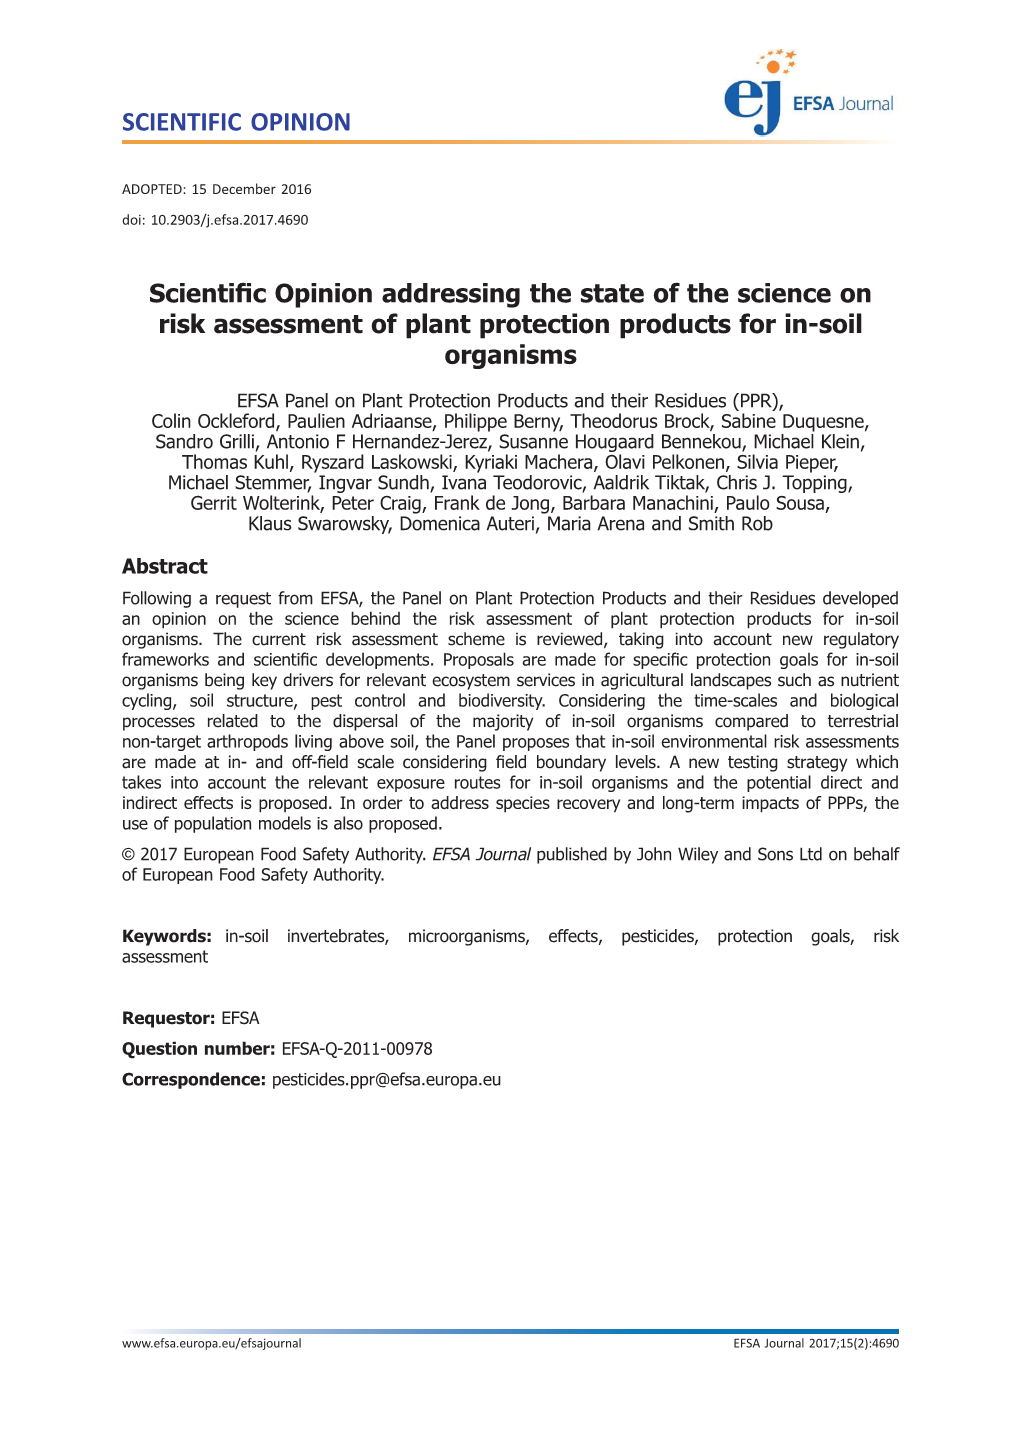 Scientific Opinion Addressing the State of the Science